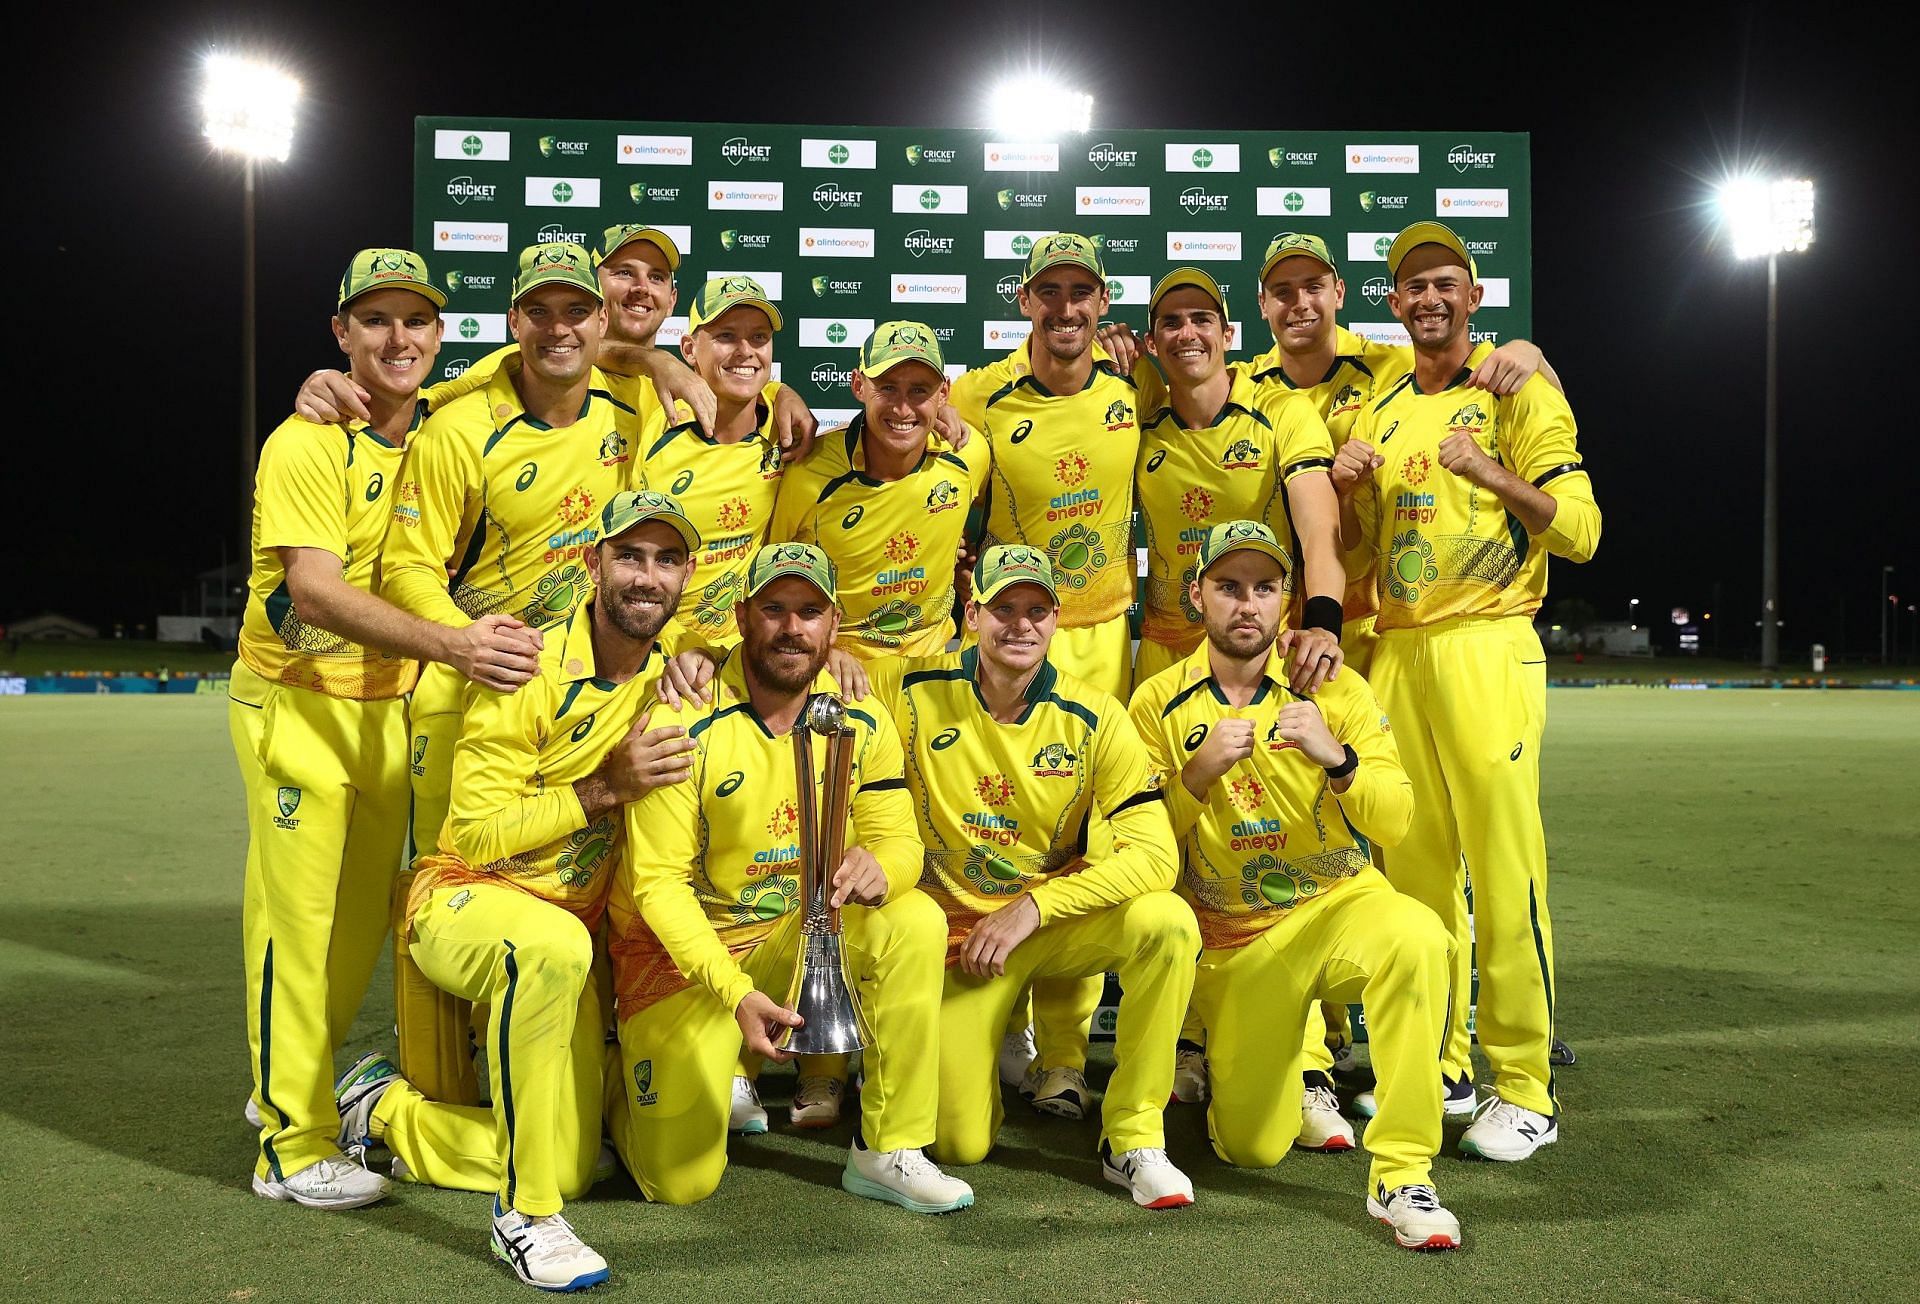 South Africa vs Australia ODI Series 2023 Full schedule, squads, match timings and live streaming details